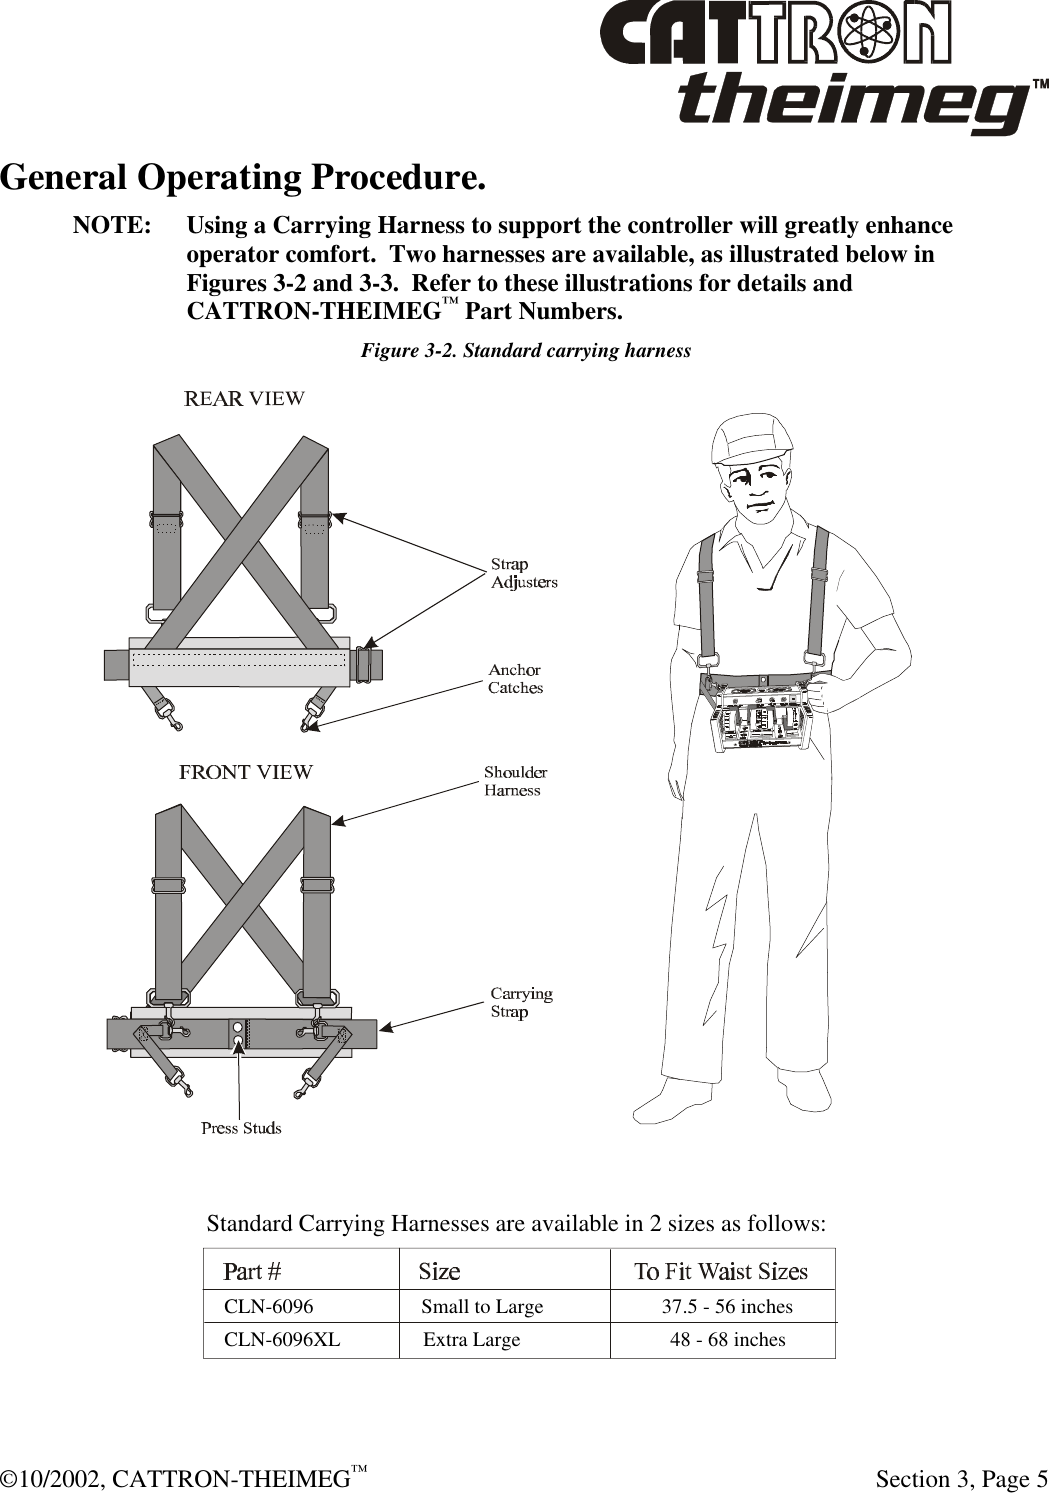  ©10/2002, CATTRON-THEIMEG™   Section 3, Page 5 General Operating Procedure.   NOTE: Using a Carrying Harness to support the controller will greatly enhance operator comfort.  Two harnesses are available, as illustrated below in Figures 3-2 and 3-3.  Refer to these illustrations for details and CATTRON-THEIMEG™ Part Numbers.  Figure 3-2. Standard carrying harness  Standard Carrying Harnesses are available in 2 sizes as follows:   CLN-6096                     Small to Large                       37.5 - 56 inches   CLN-6096XL                Extra Large                             48 - 68 inches